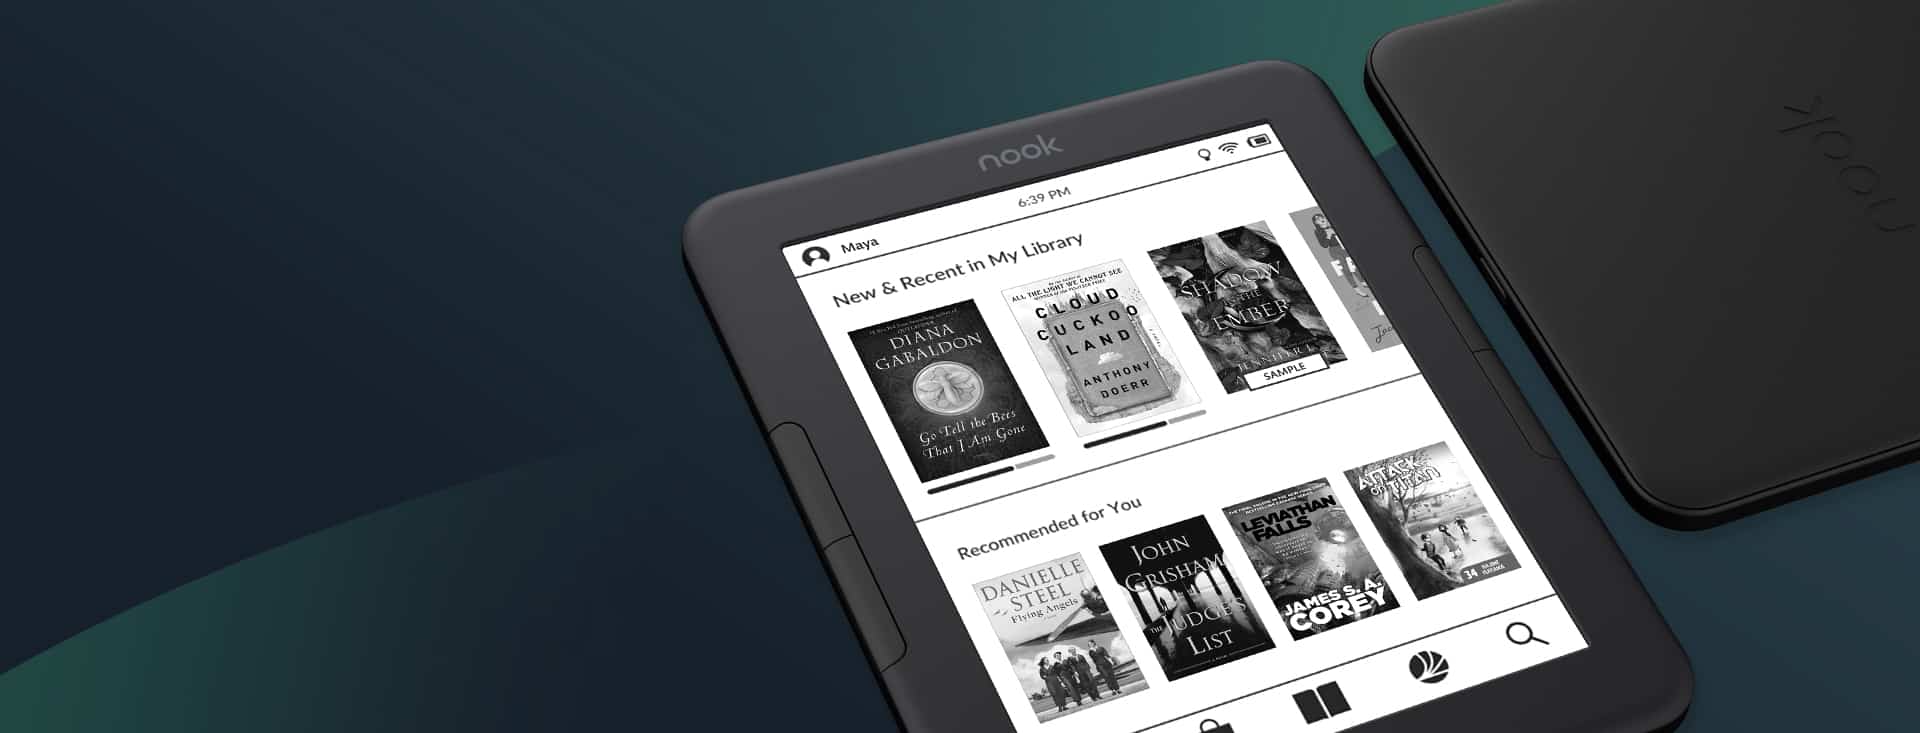 NOOK GlowLight 4 - Carry Your Library: 32 GB Allows You to Carry Your Entire Library in Your Hands